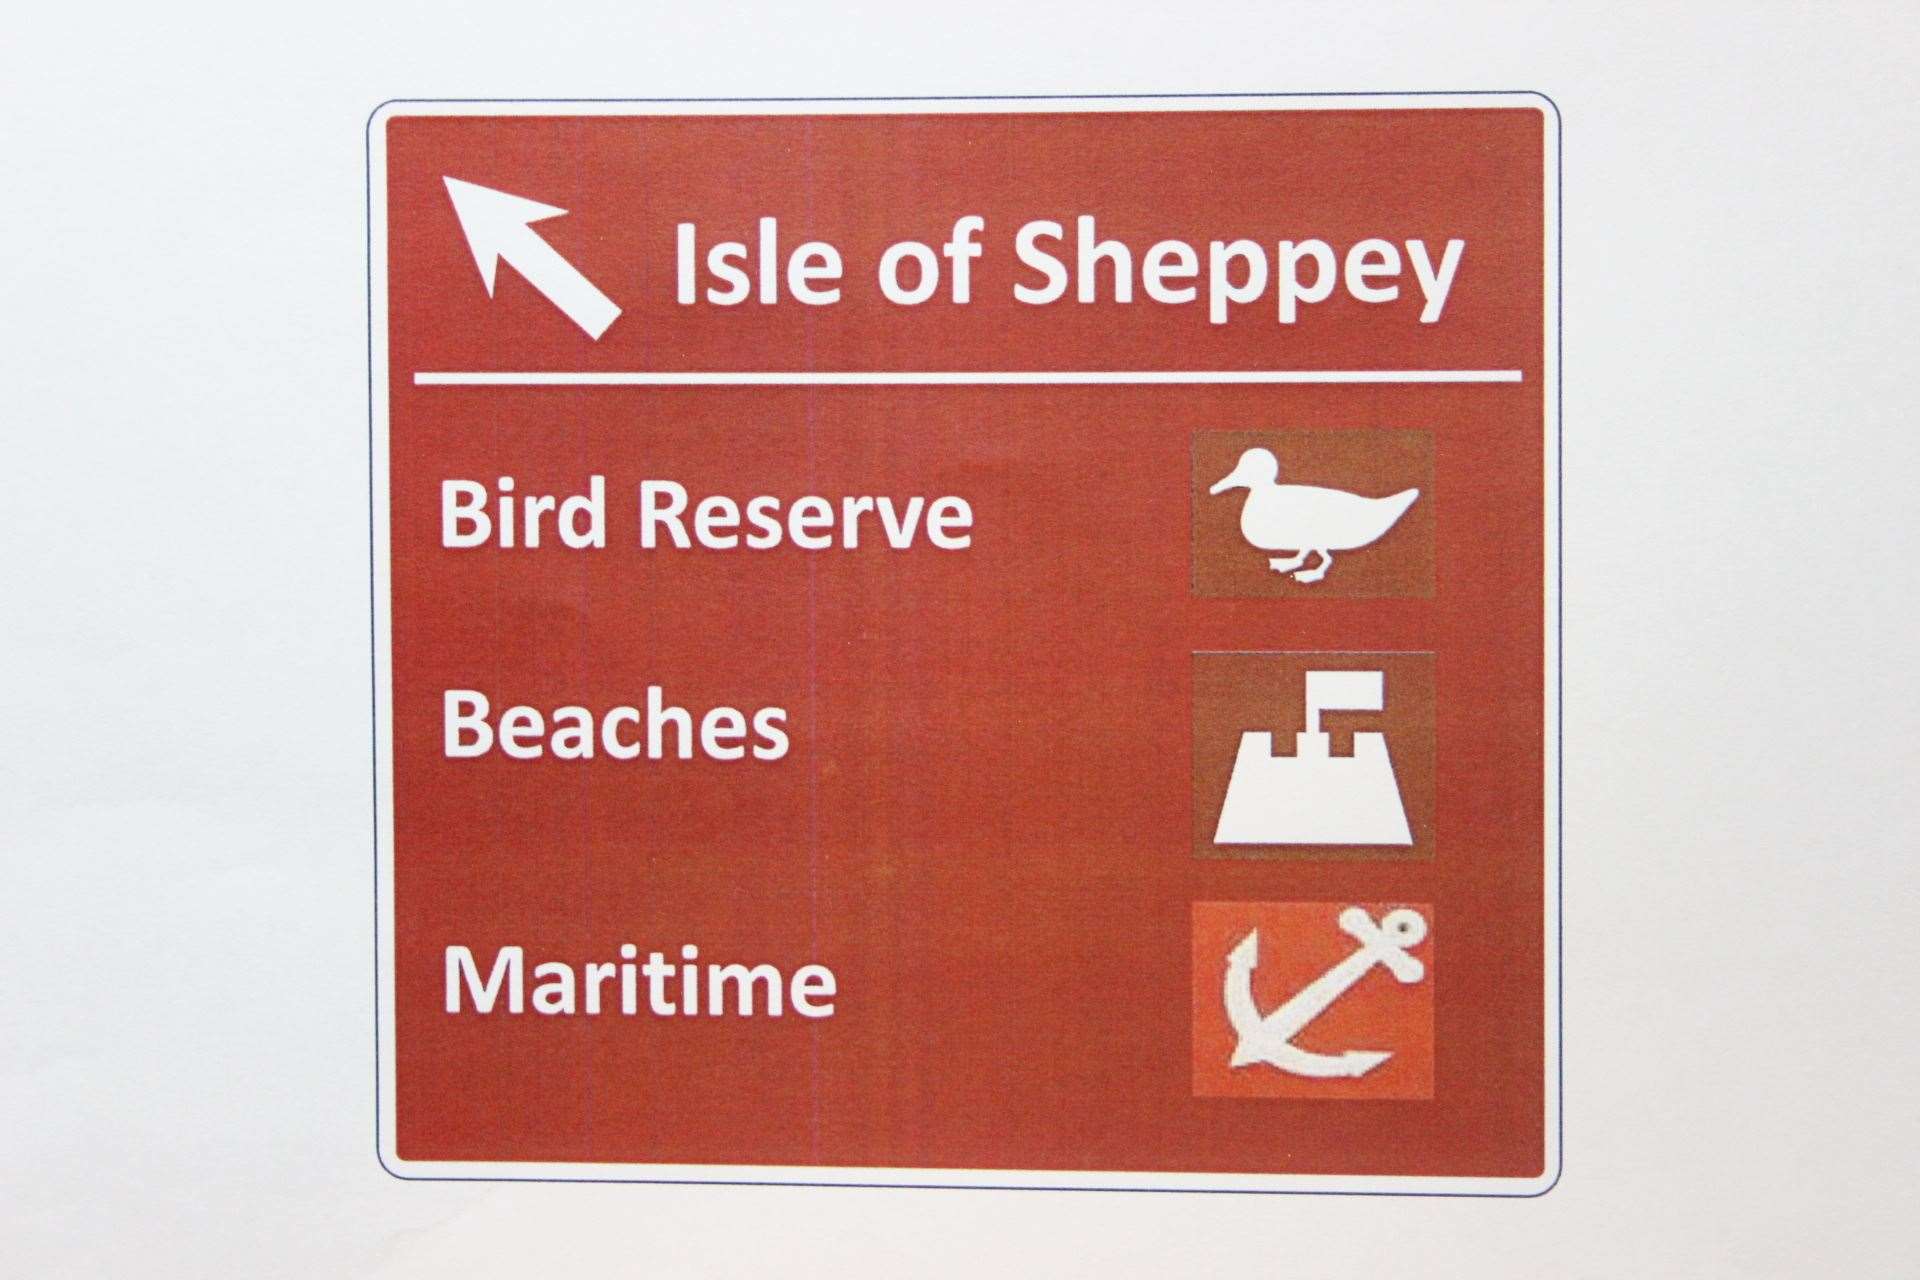 Updated design of what Sheppey brown tourist sign on the M2 could look like, from Sheppey Community Development Forum